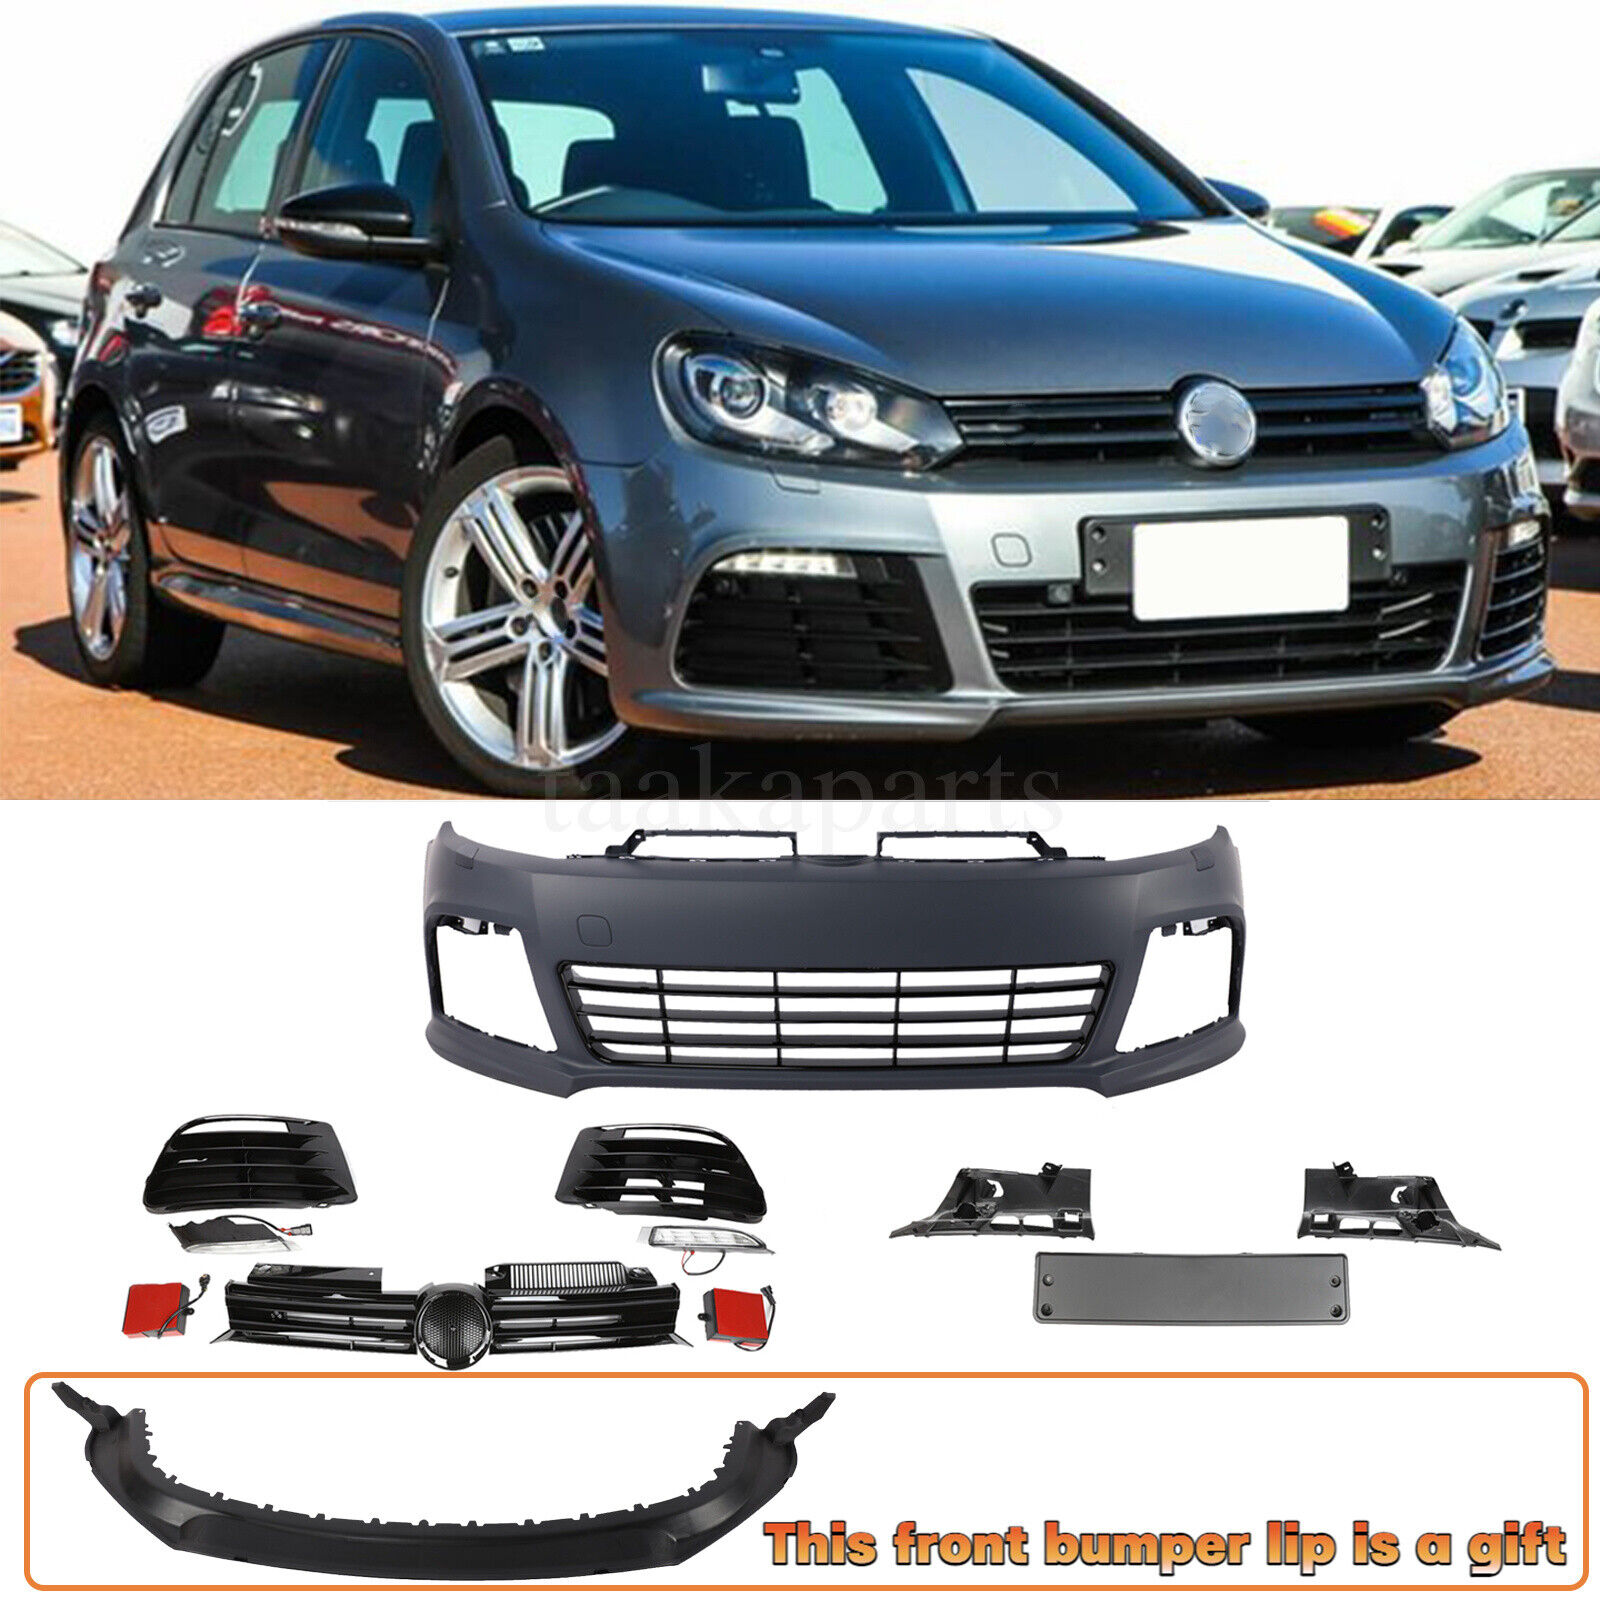 R20 Style Front Rear Bumper Cover Kit Fit For VW Volkswagen Golf 6 MK6 2012 2013